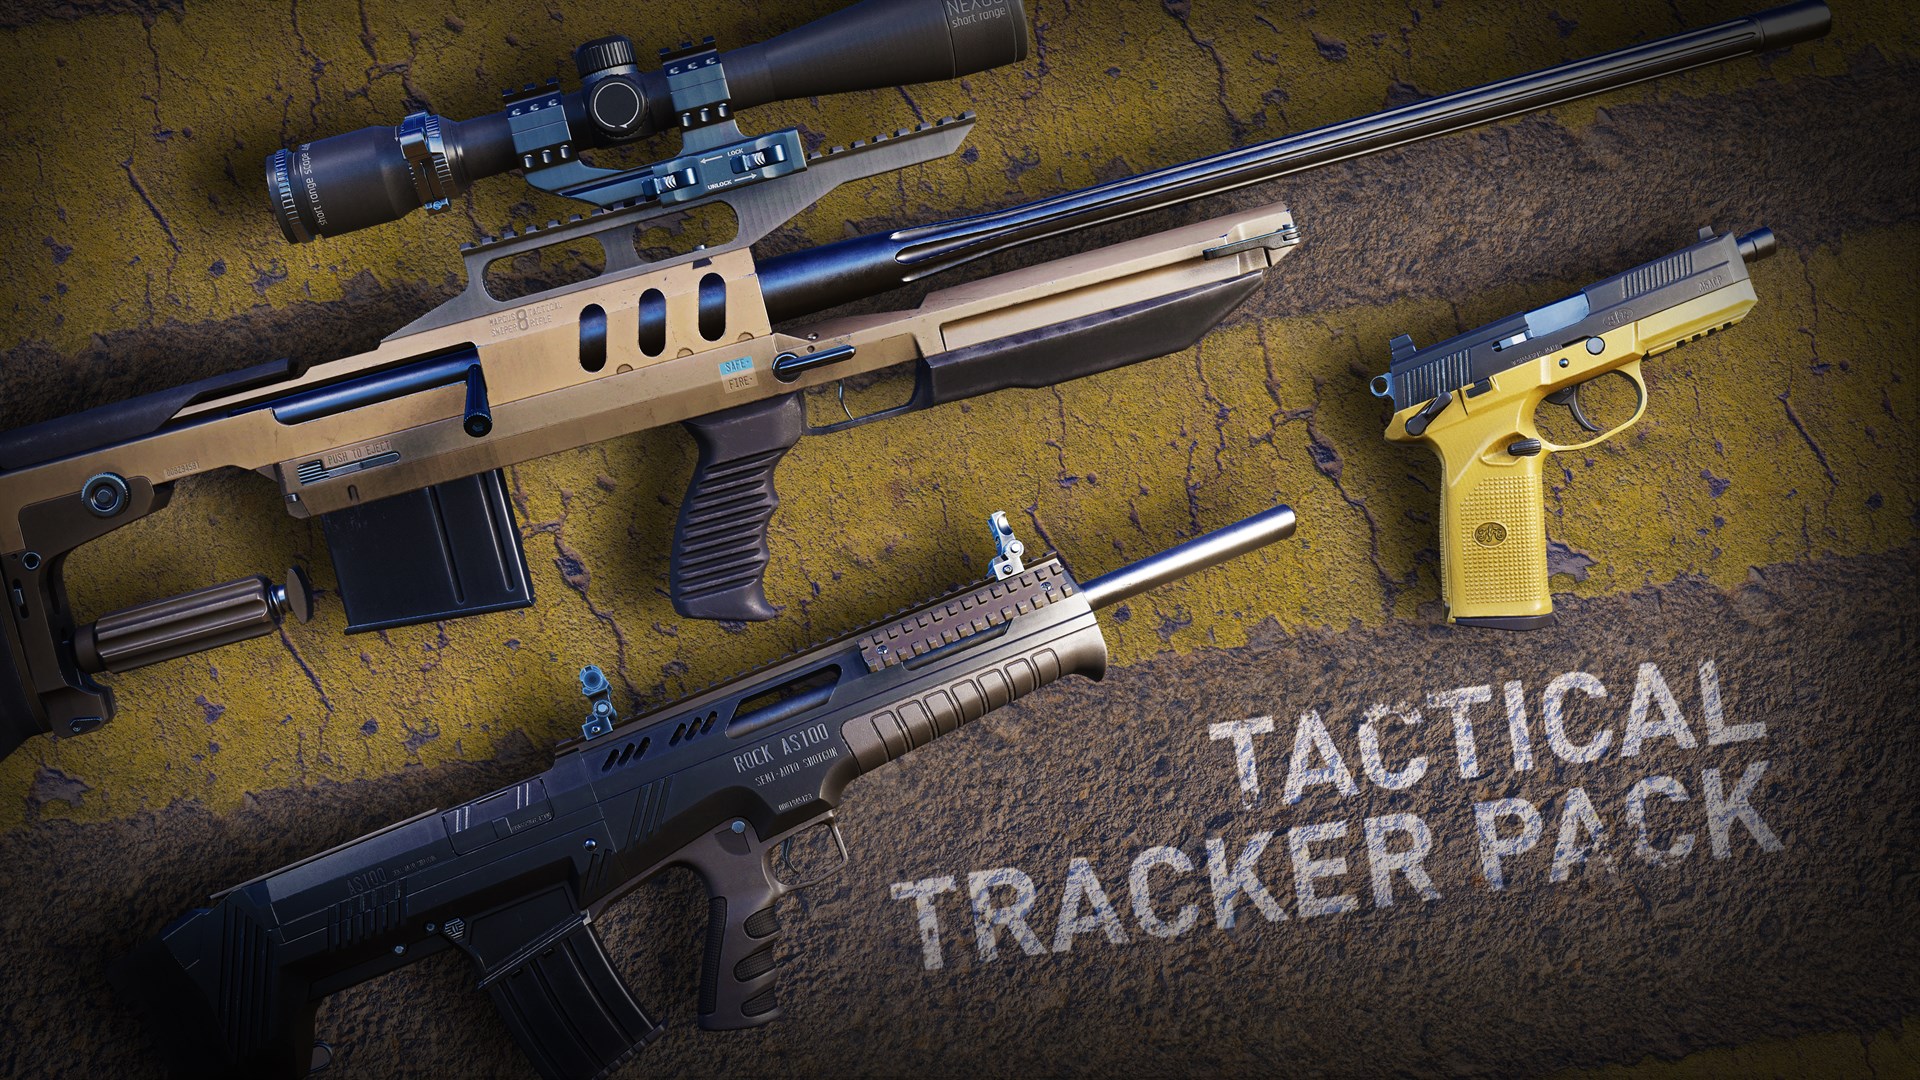 Tactical Tracker Weapons Pack